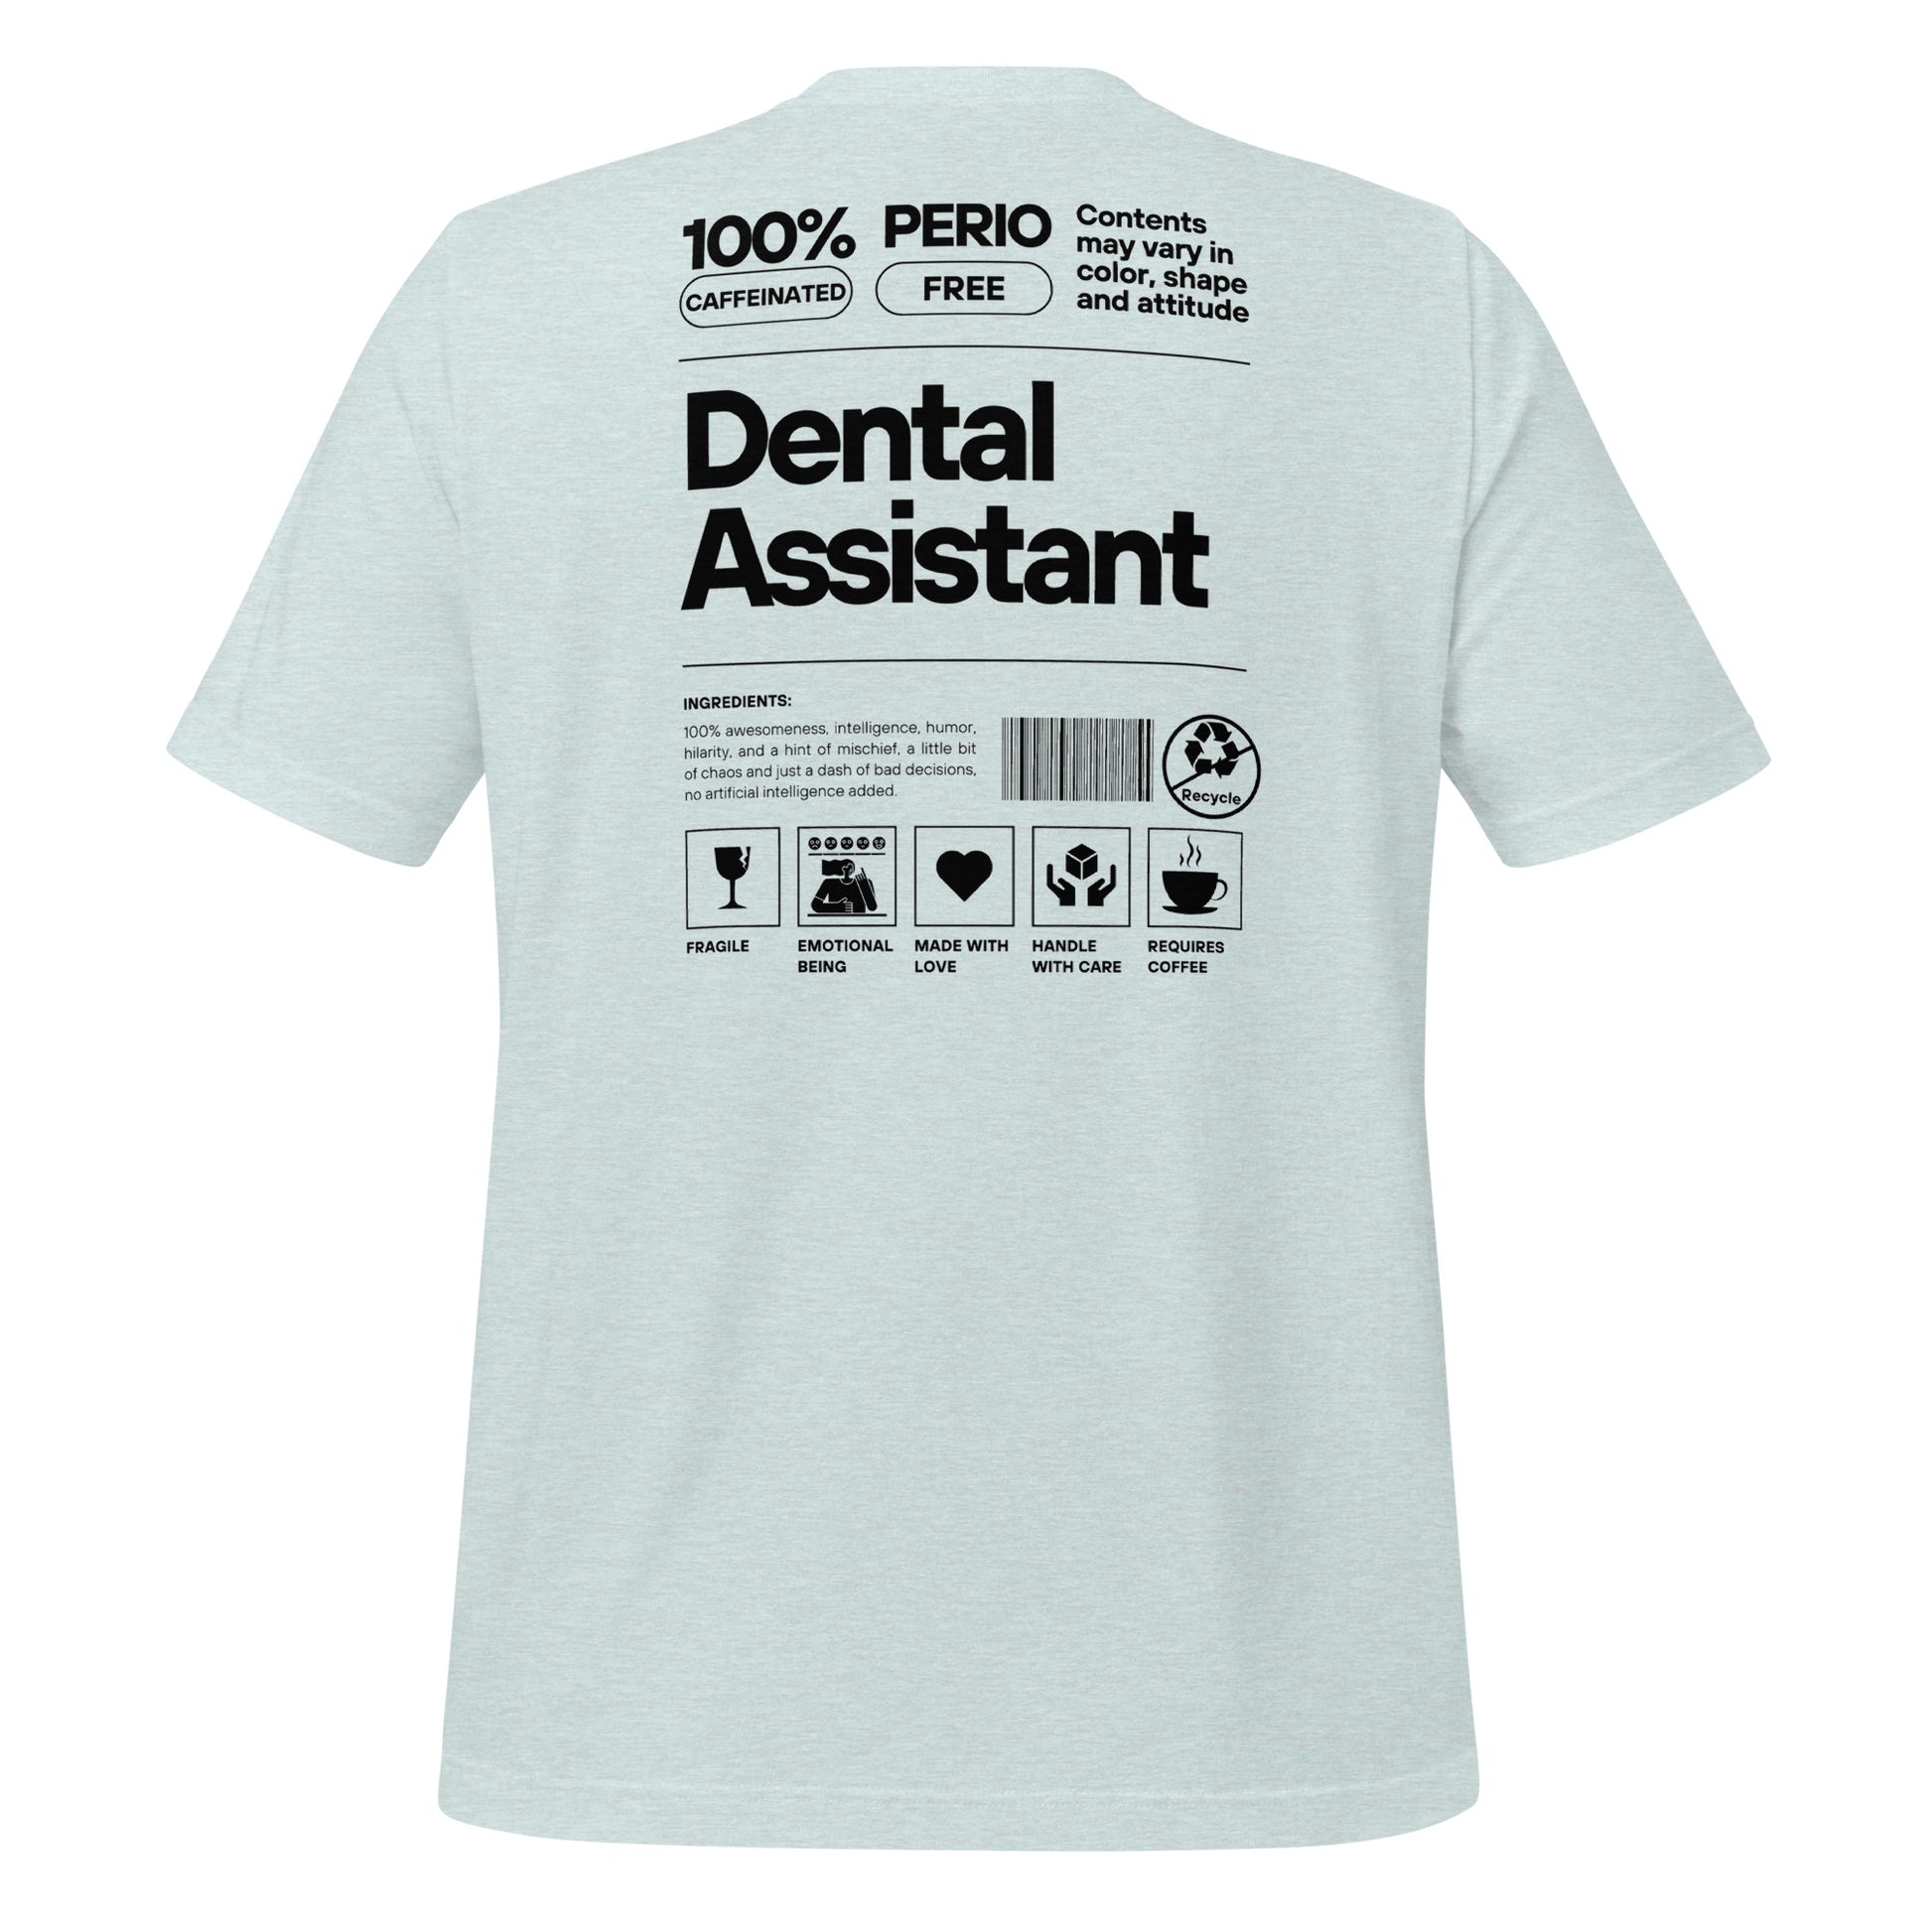 Heather prism ice blue dental assistant shirt featuring a creative label design with icons and text, perfect for dental assistants who want to express their identity and passion for their job - dental shirts back view.